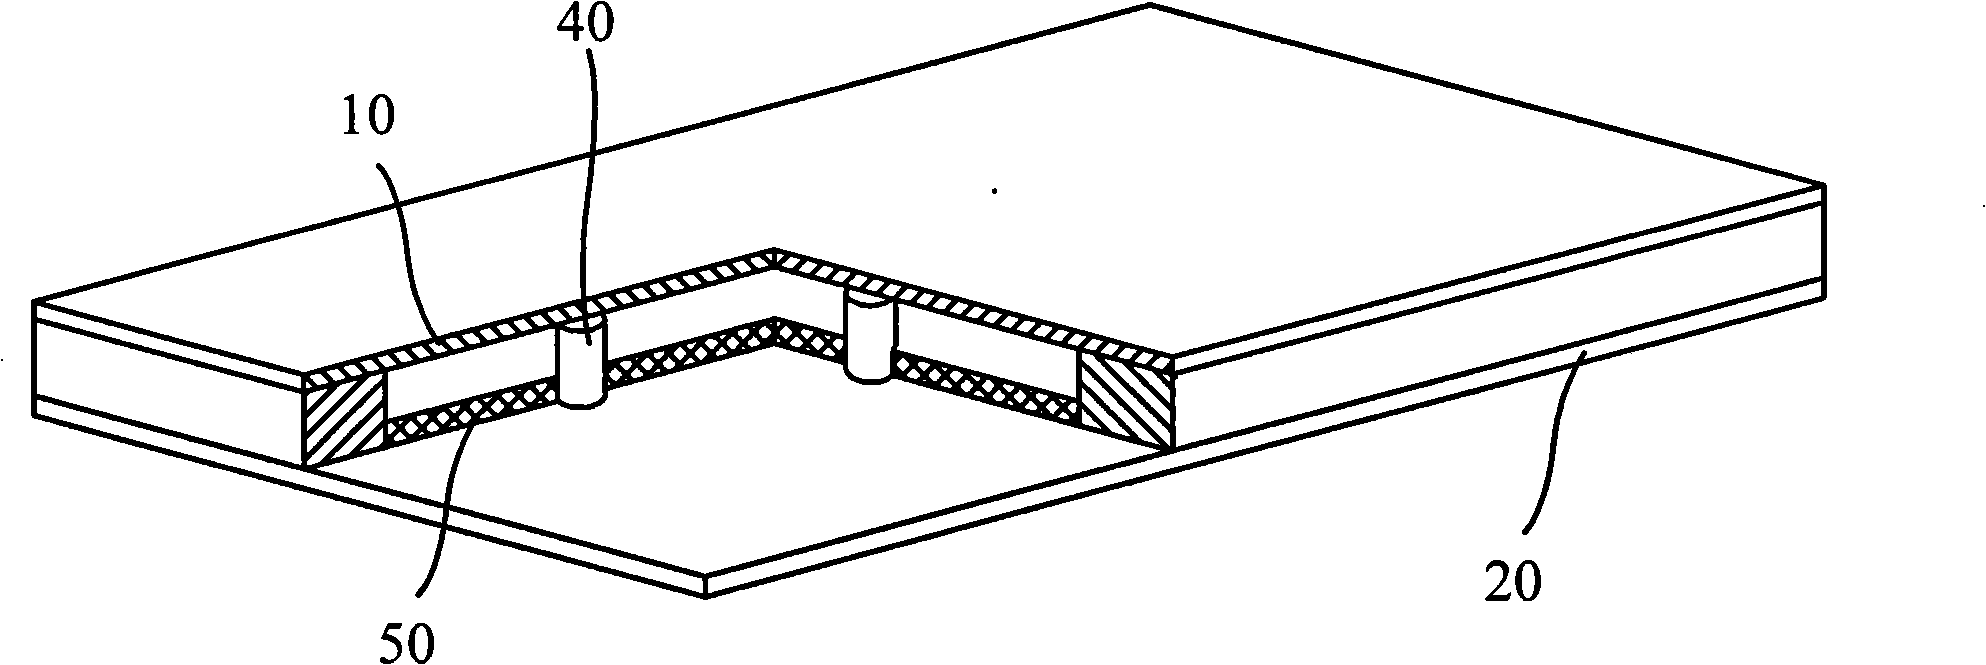 Imbibition chip, imbibition core and plate type integrated hot pipe